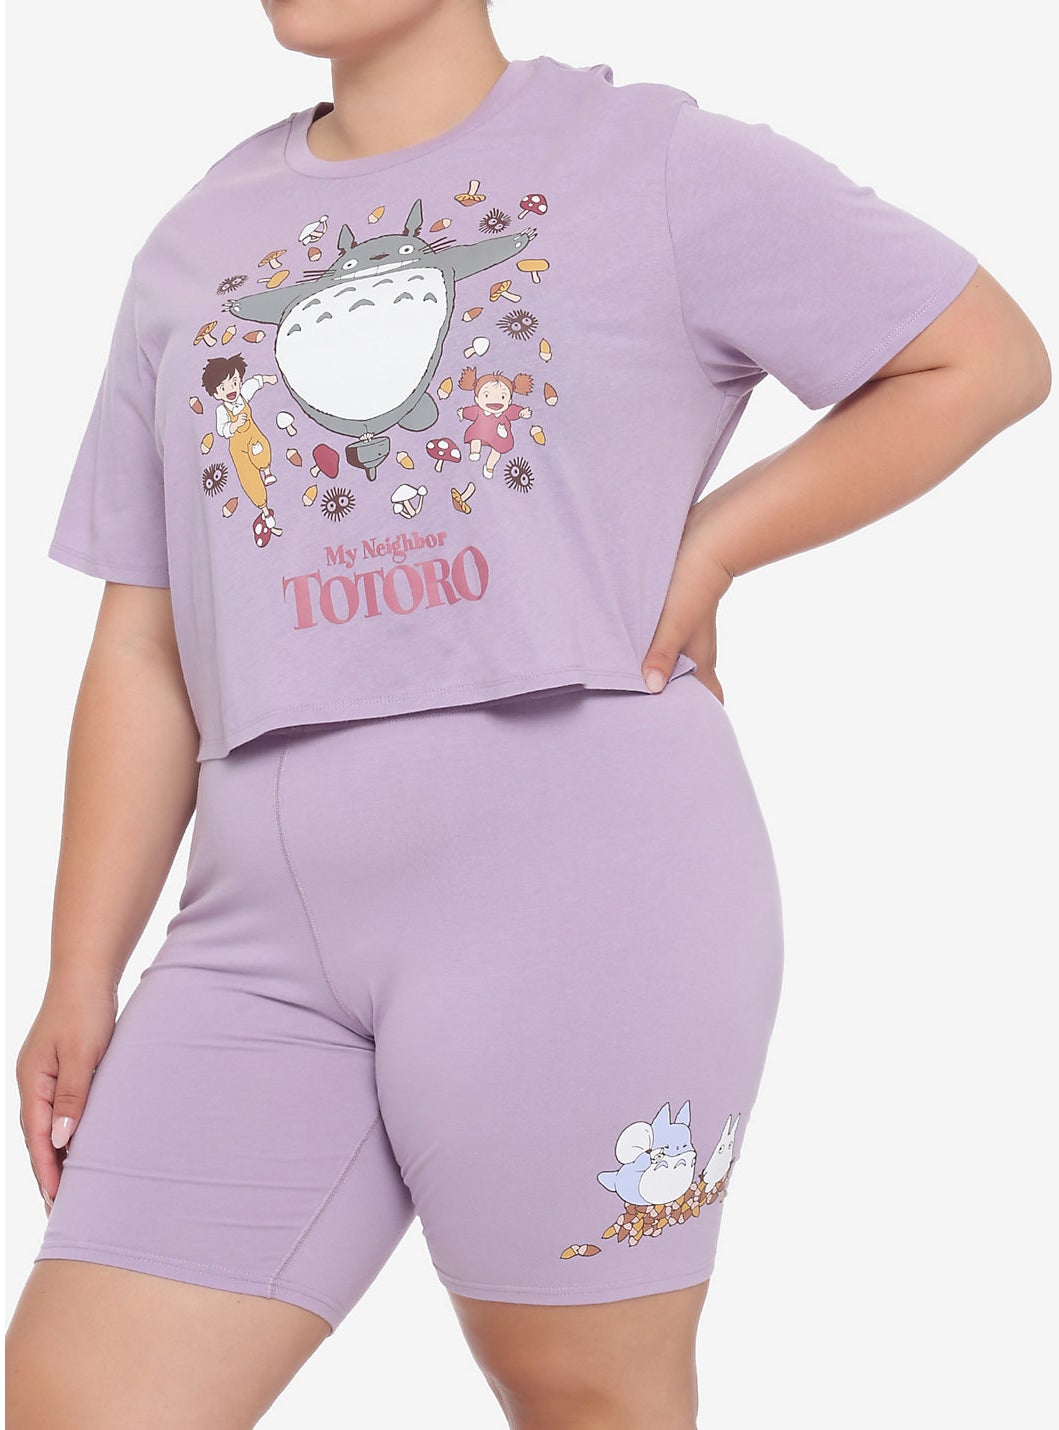 model in the purple crop top and bike shorts with graphics of Totoro characters